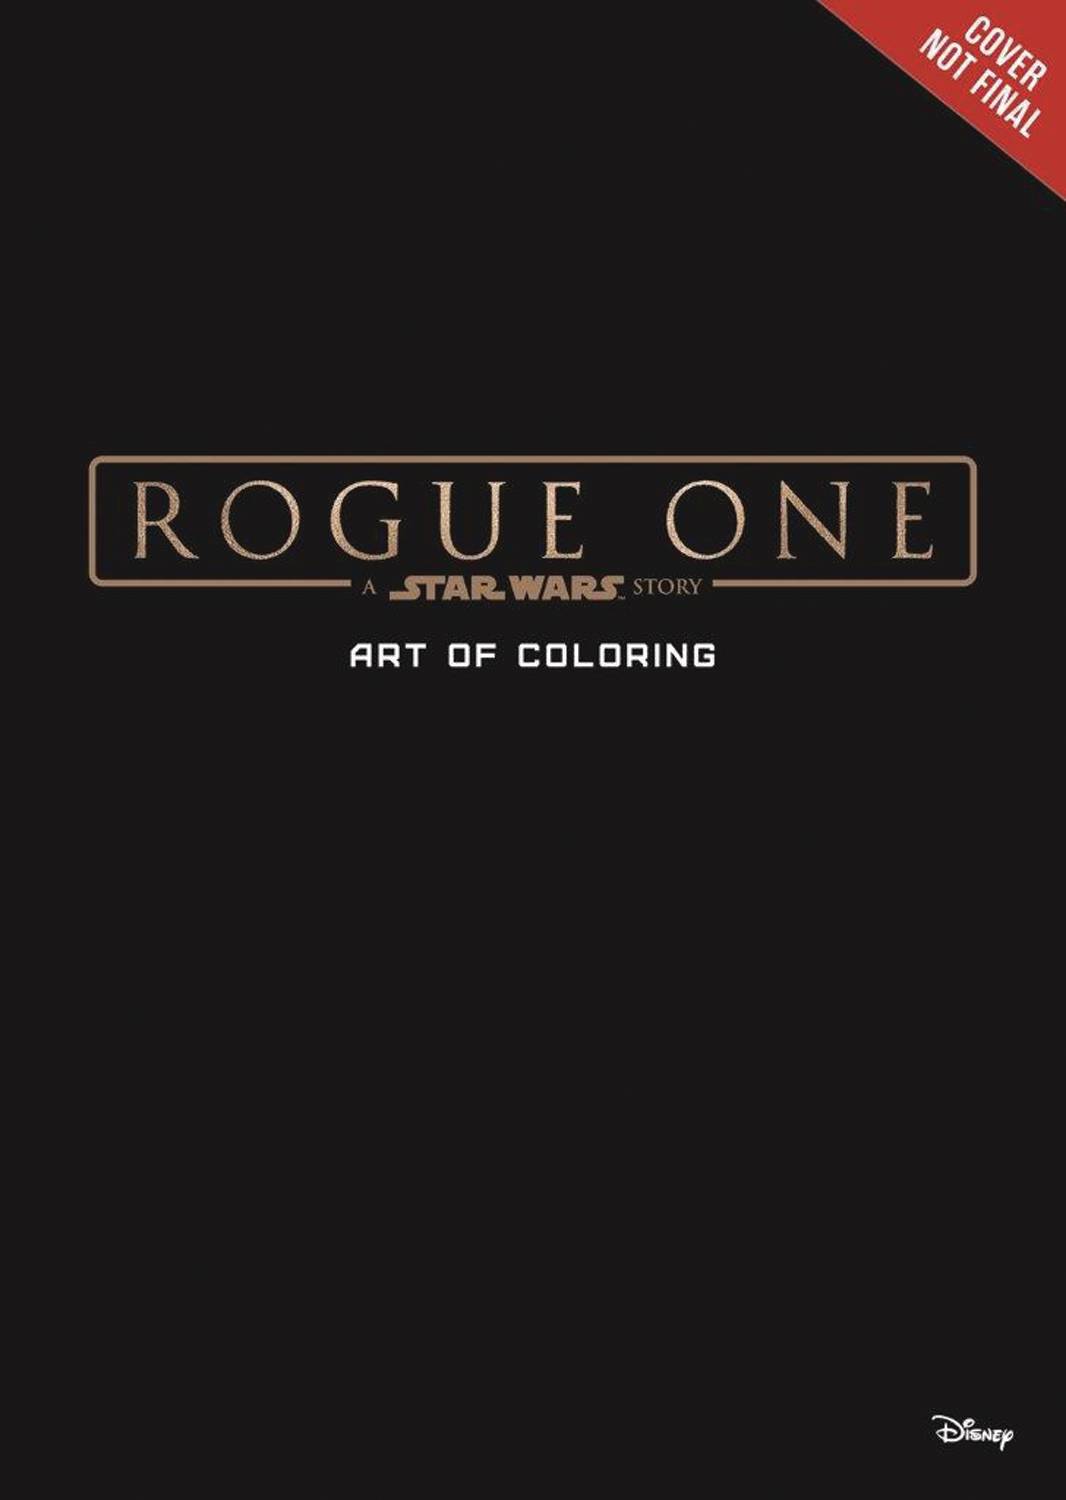 Art of Coloring Star Wars Rogue One Soft Cover